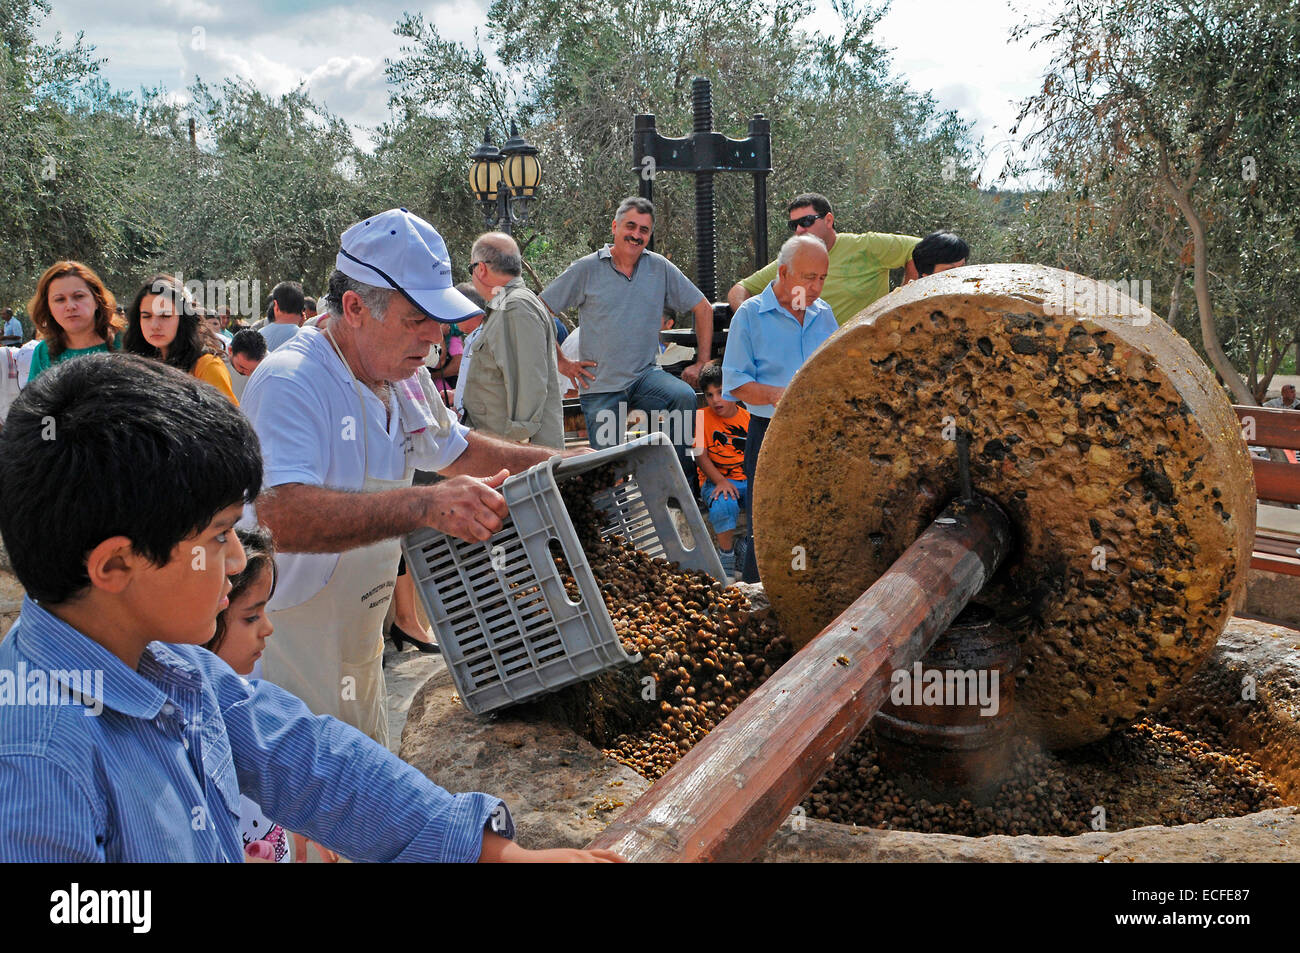 Grinding and pressing the olives at the Amargeti Village Festival in Cyprus Stock Photo